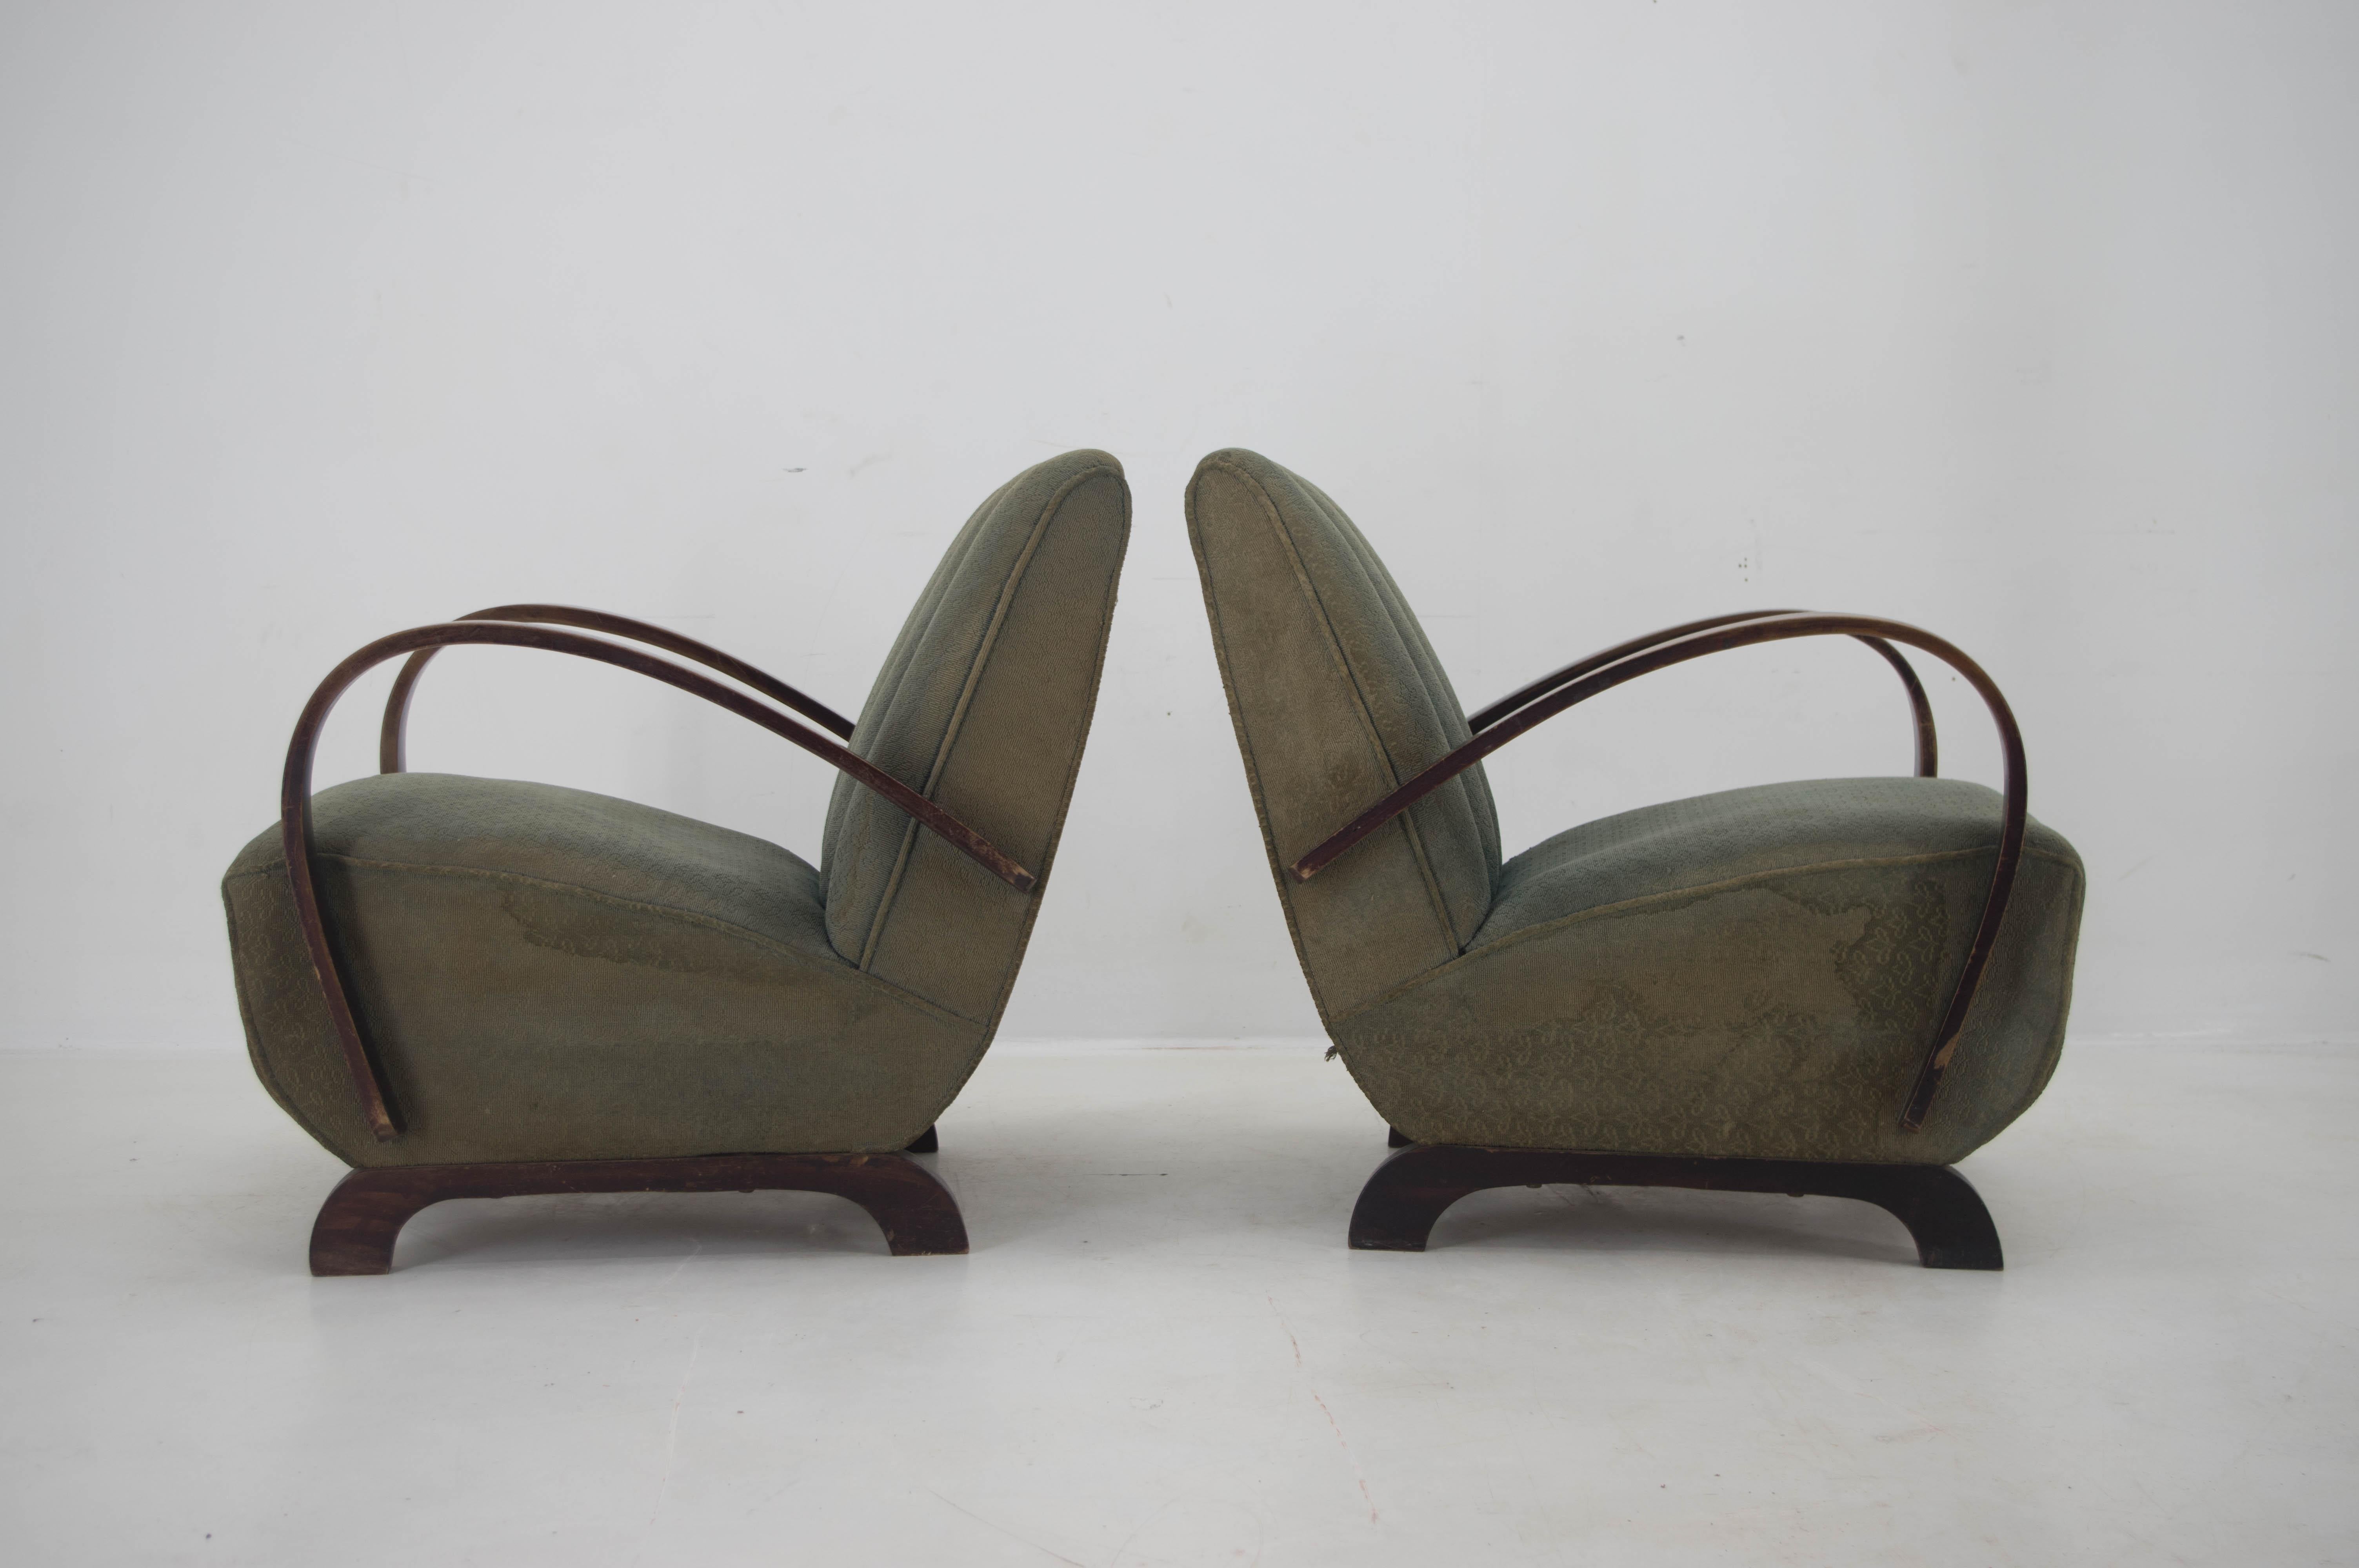 Czech Set of Two Art Deco Armchairs by Jindrich Halabala, 1940s For Sale